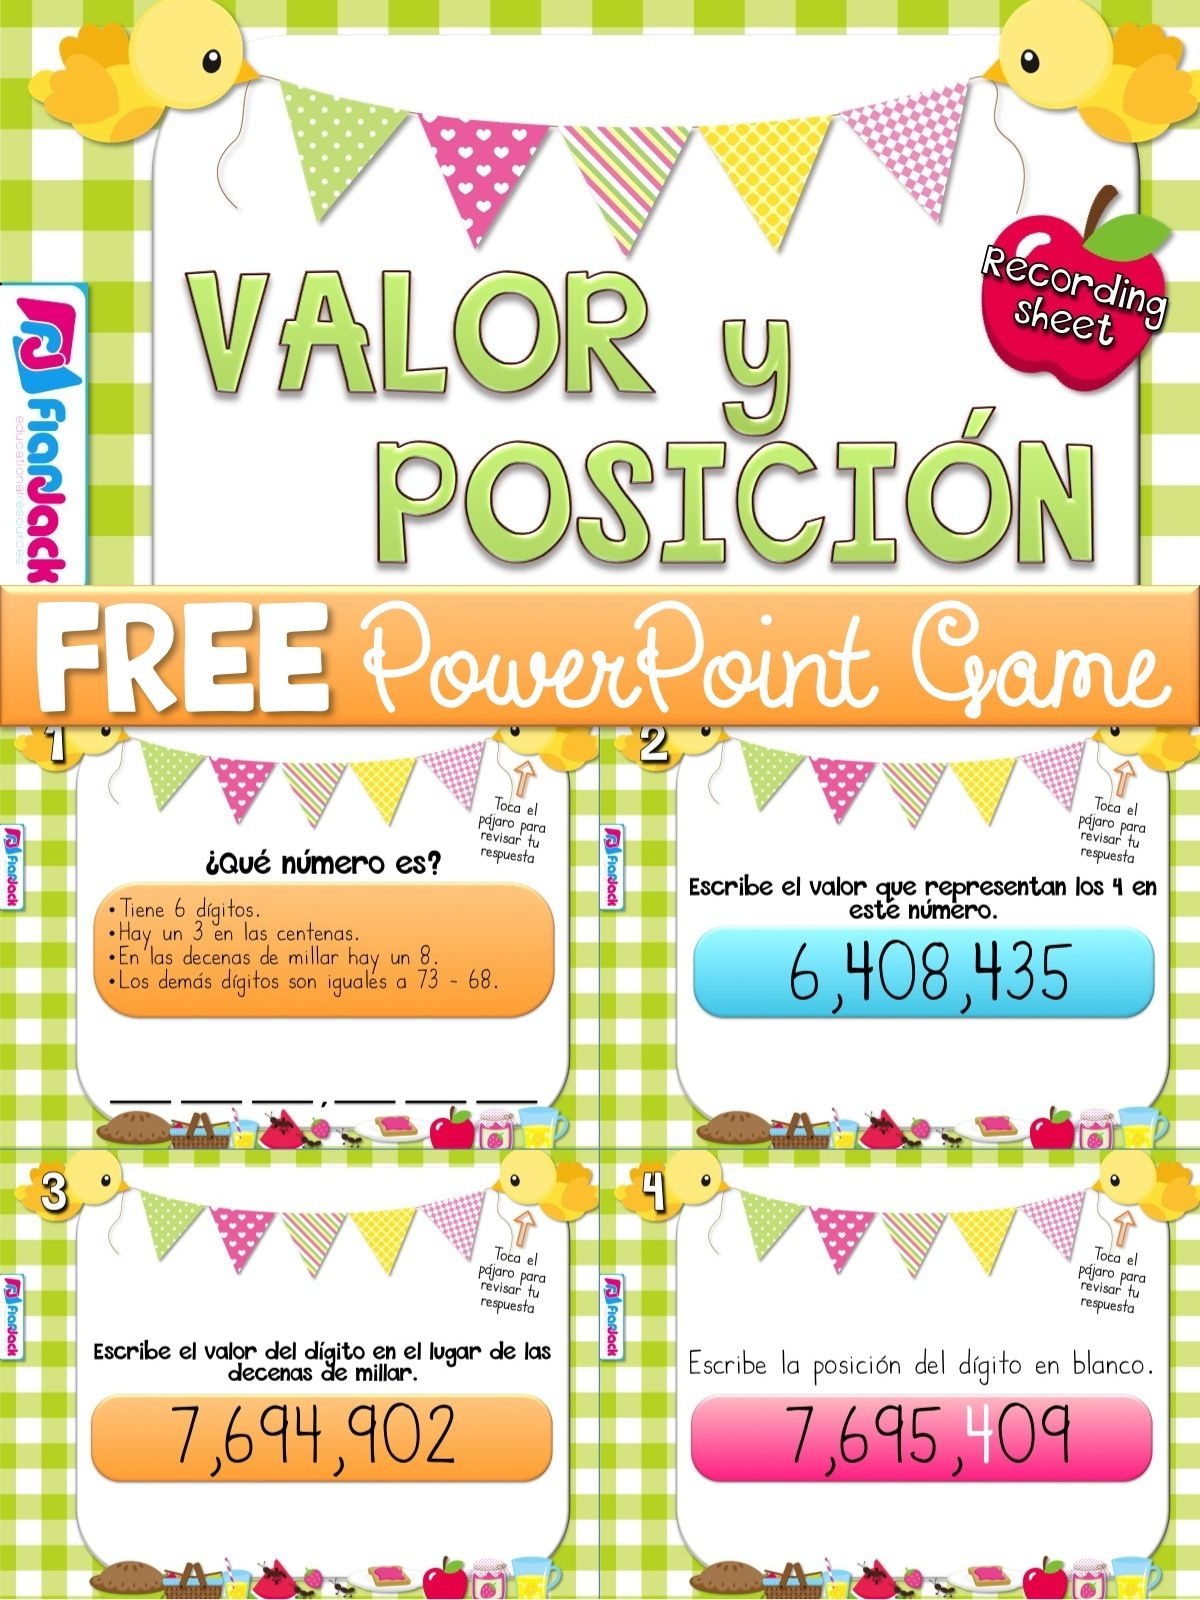 Free Printable Place Value Chart In Spanish Free Printable